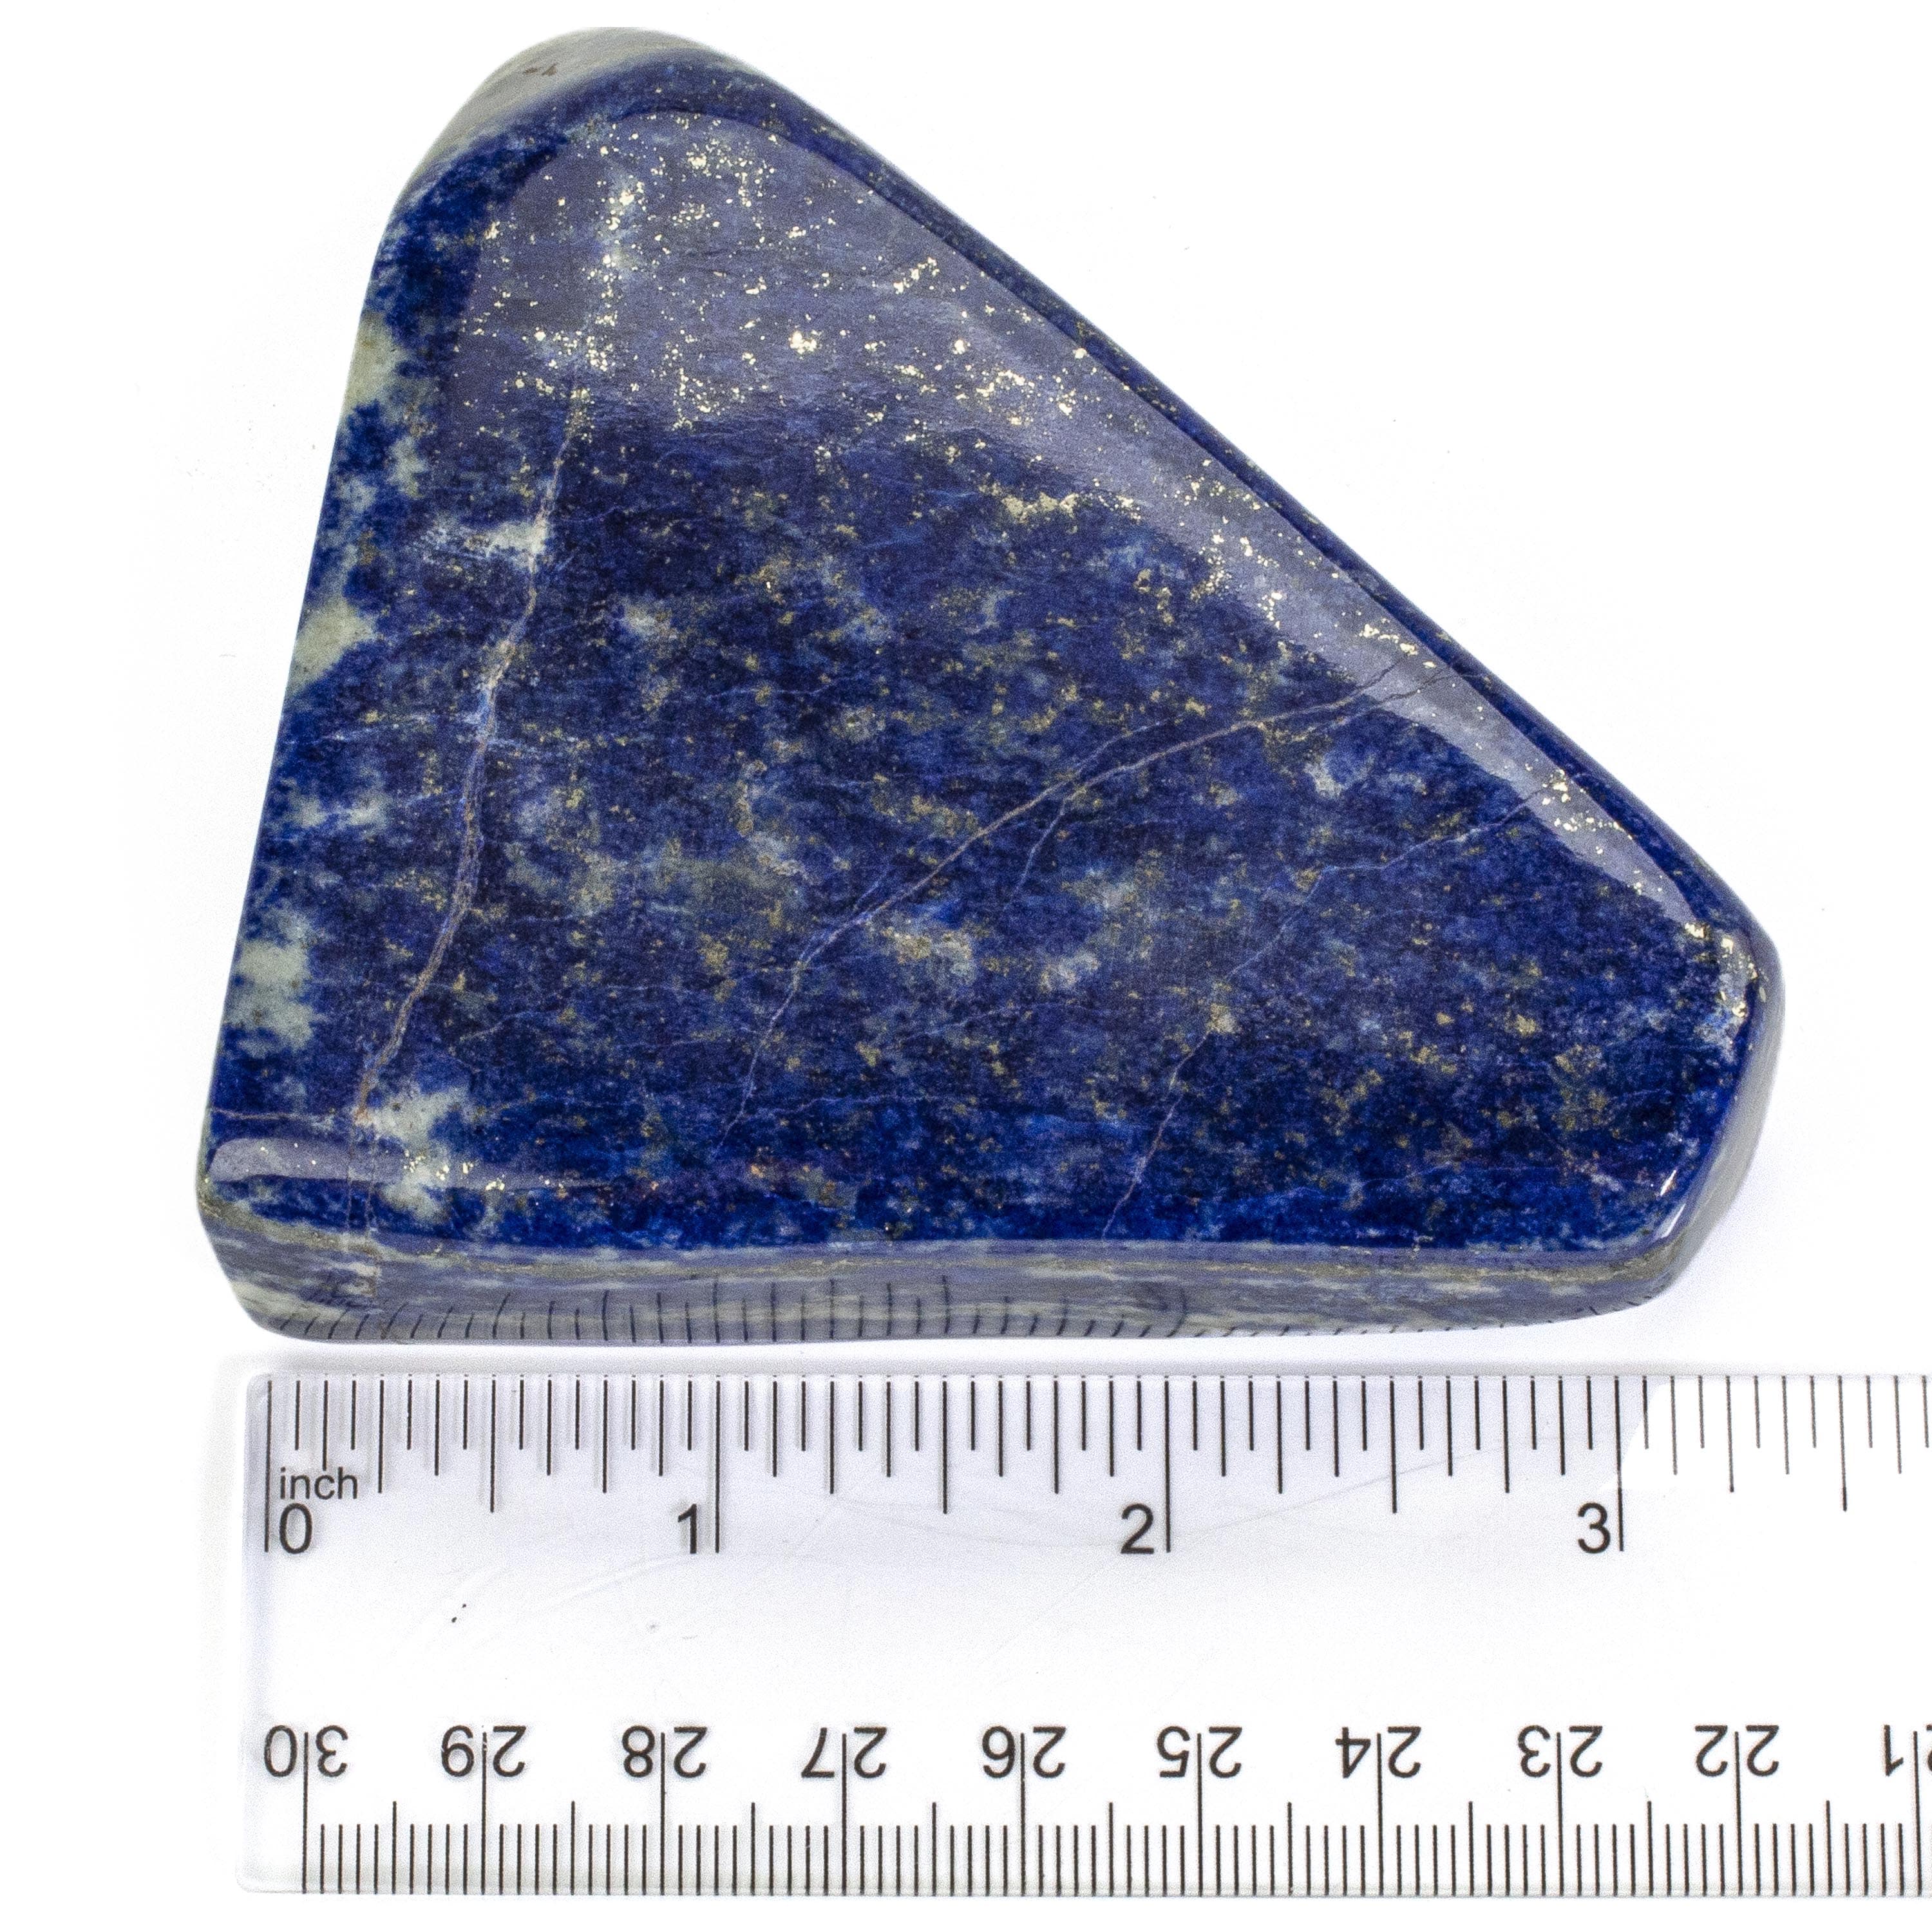 Kalifano Lapis Lapis Lazuil Freeform from Afghanistan - 400 g / 0.9 lbs LP500.006